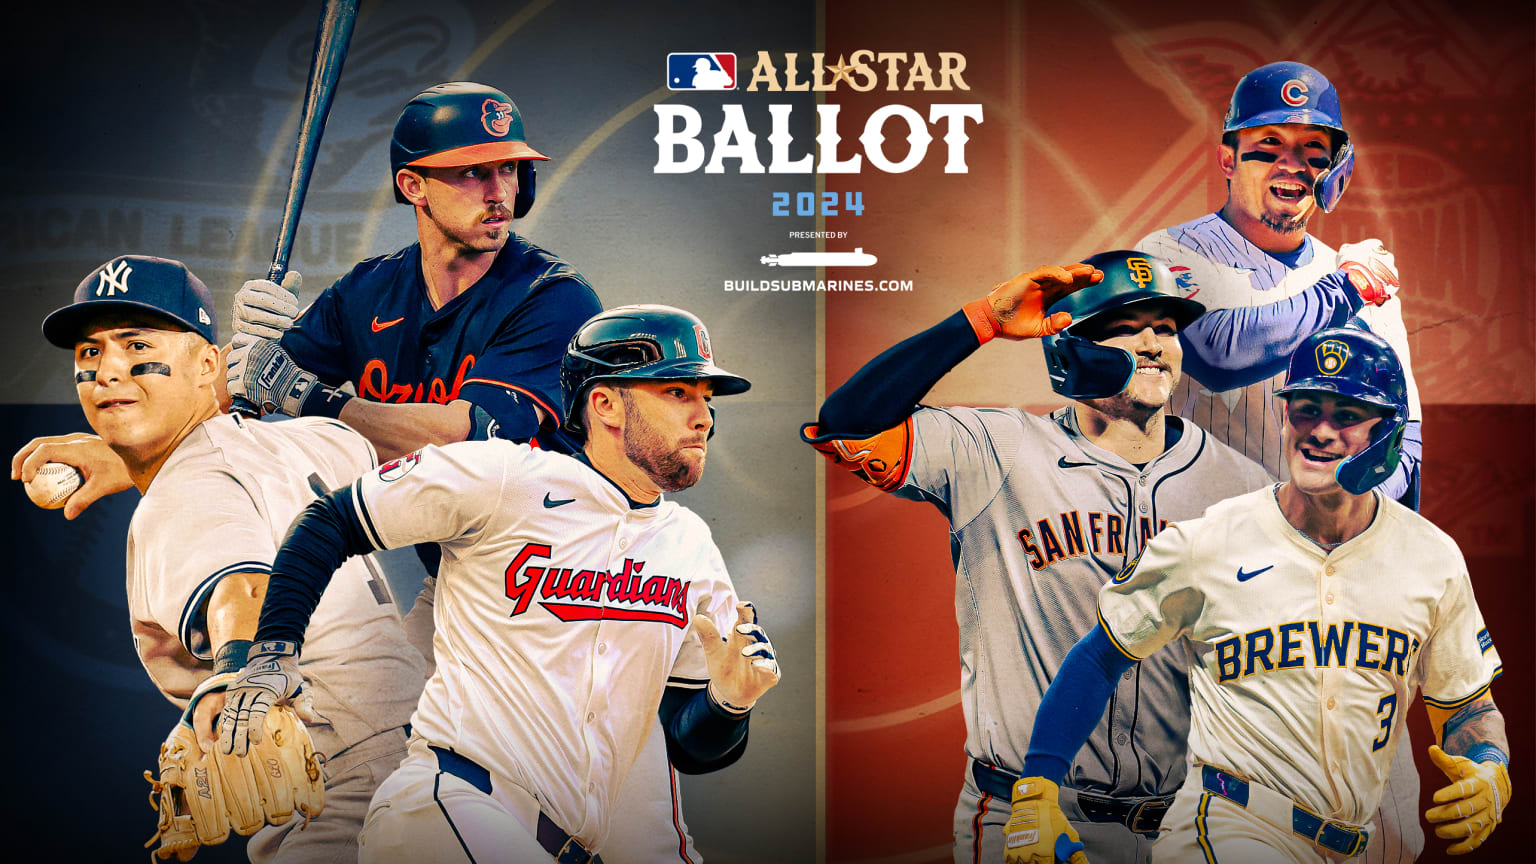 A photo illustration of six players having All-Star-worthy seasons, with the All-Star Ballot logo 